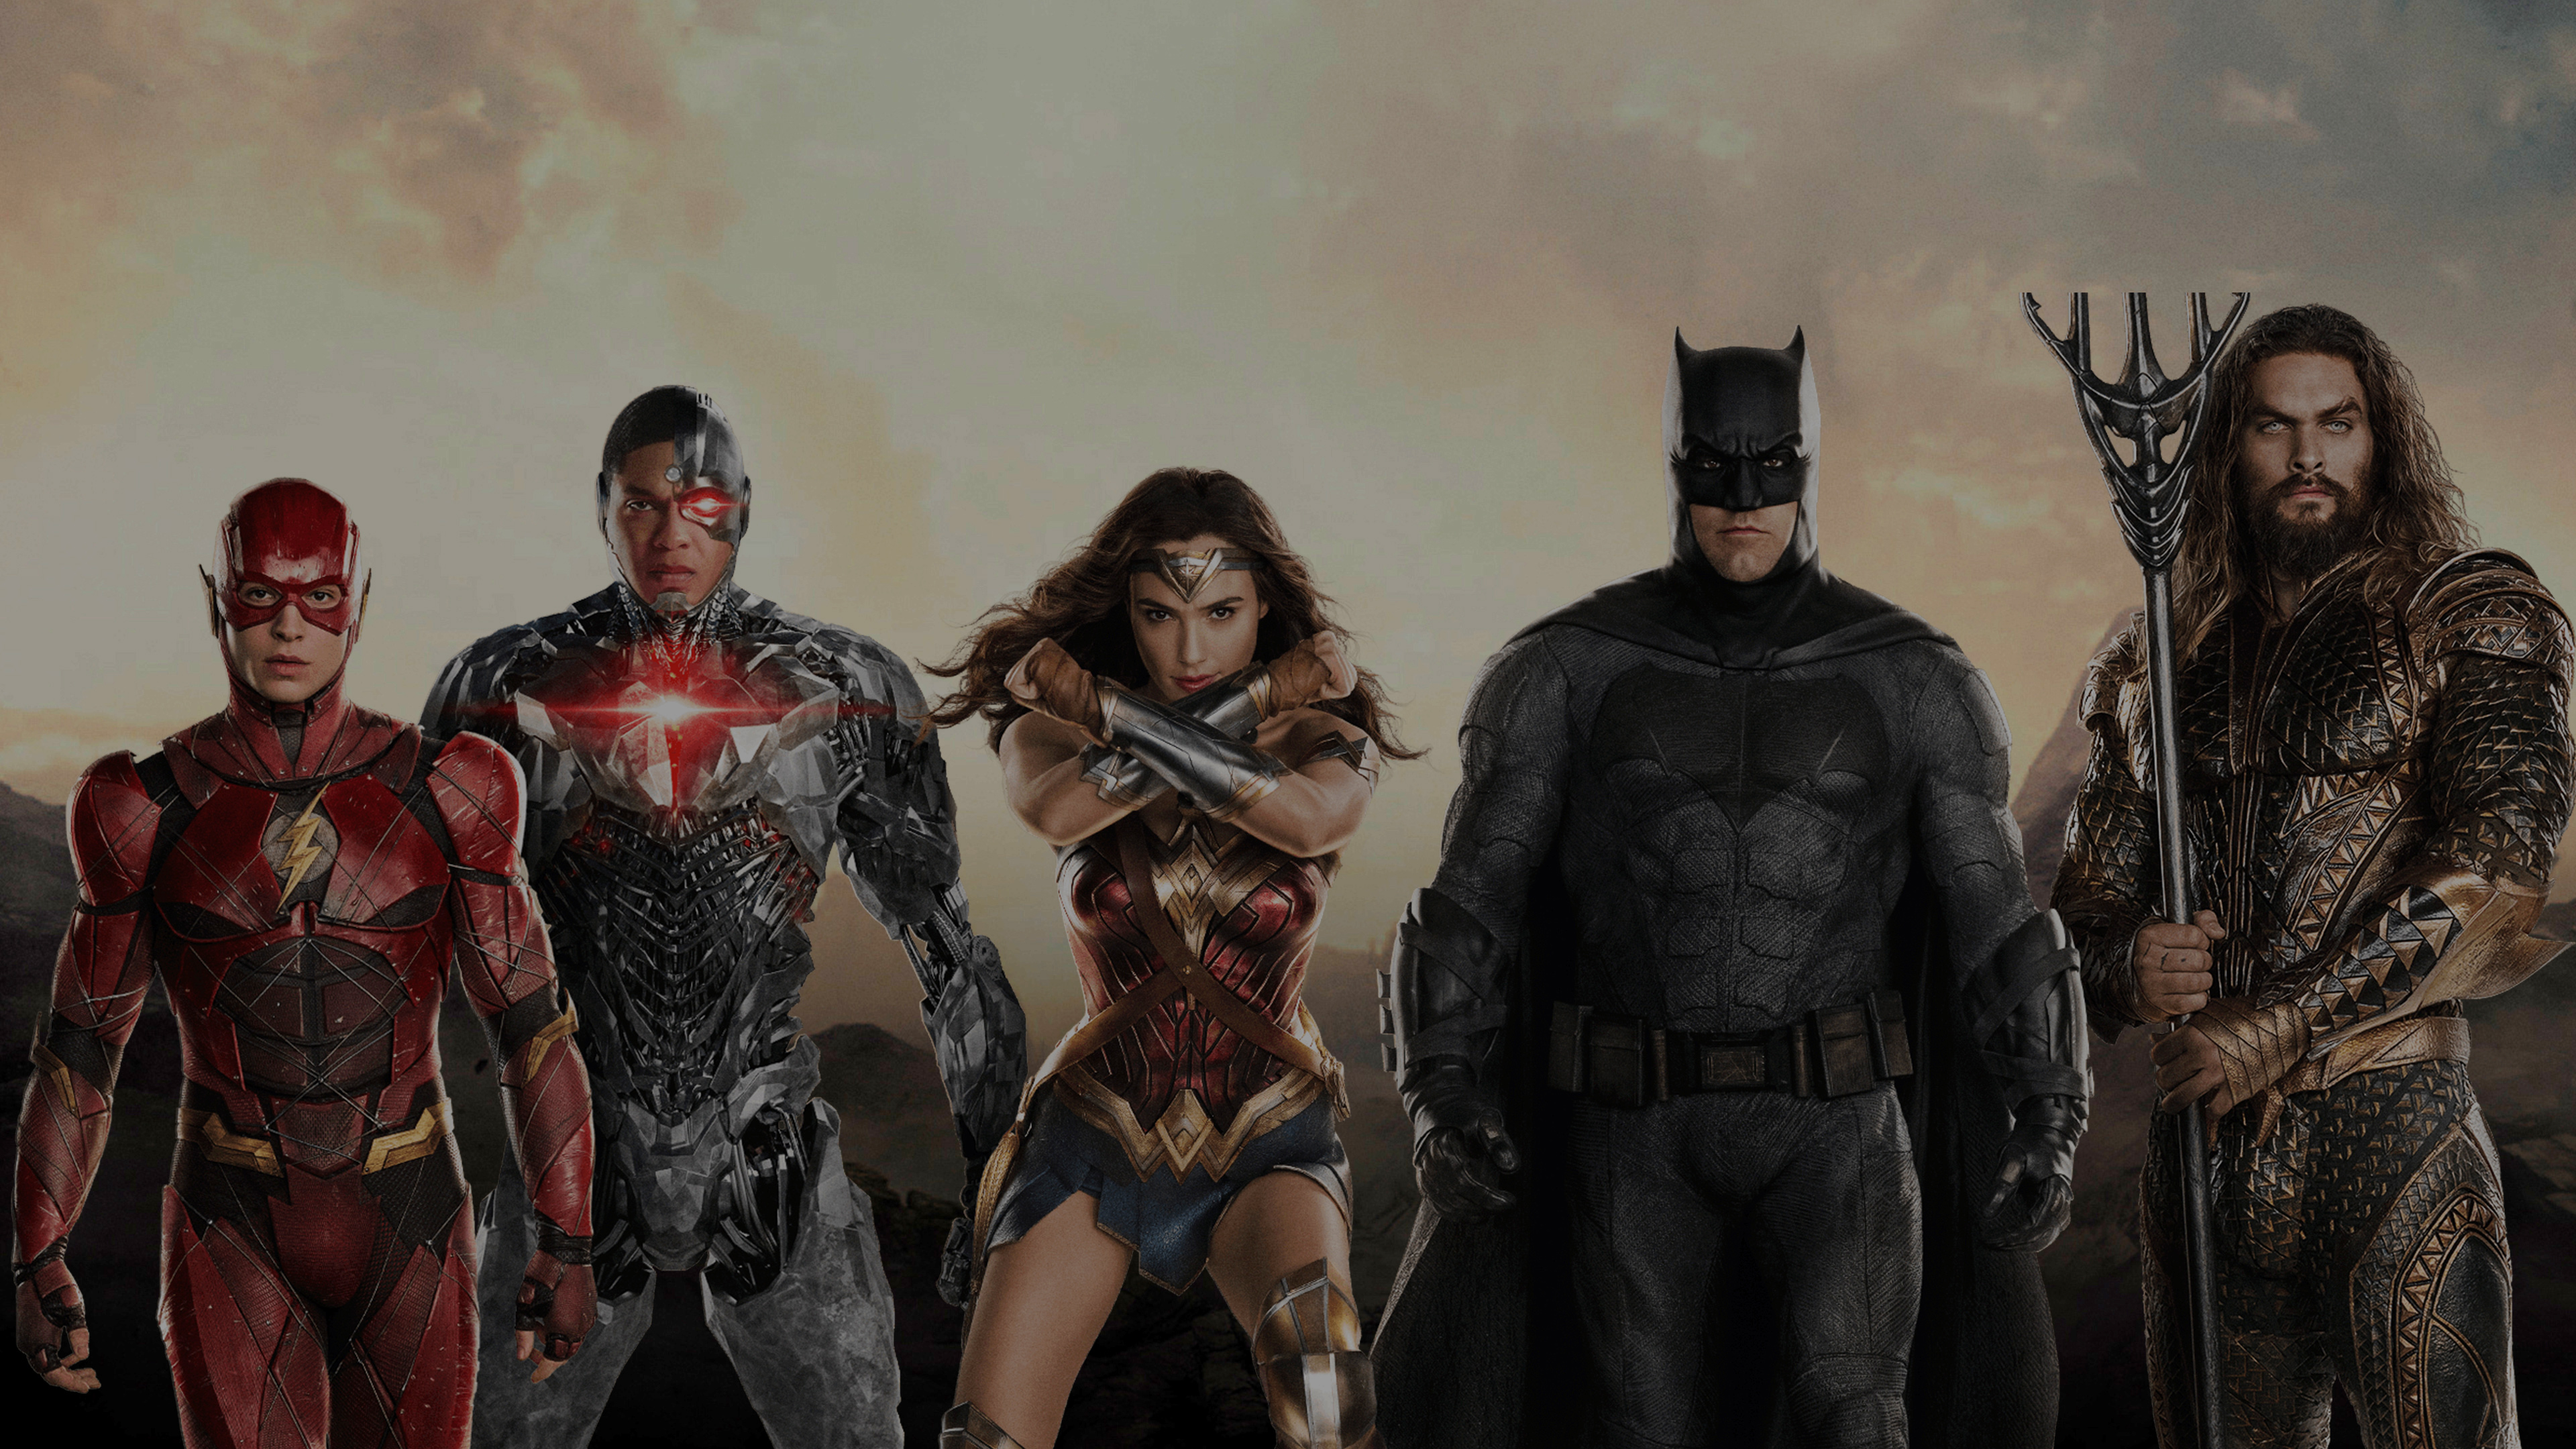 justice league movie wallpaper,fictional character,superhero,cg artwork,justice league,massively multiplayer online role playing game